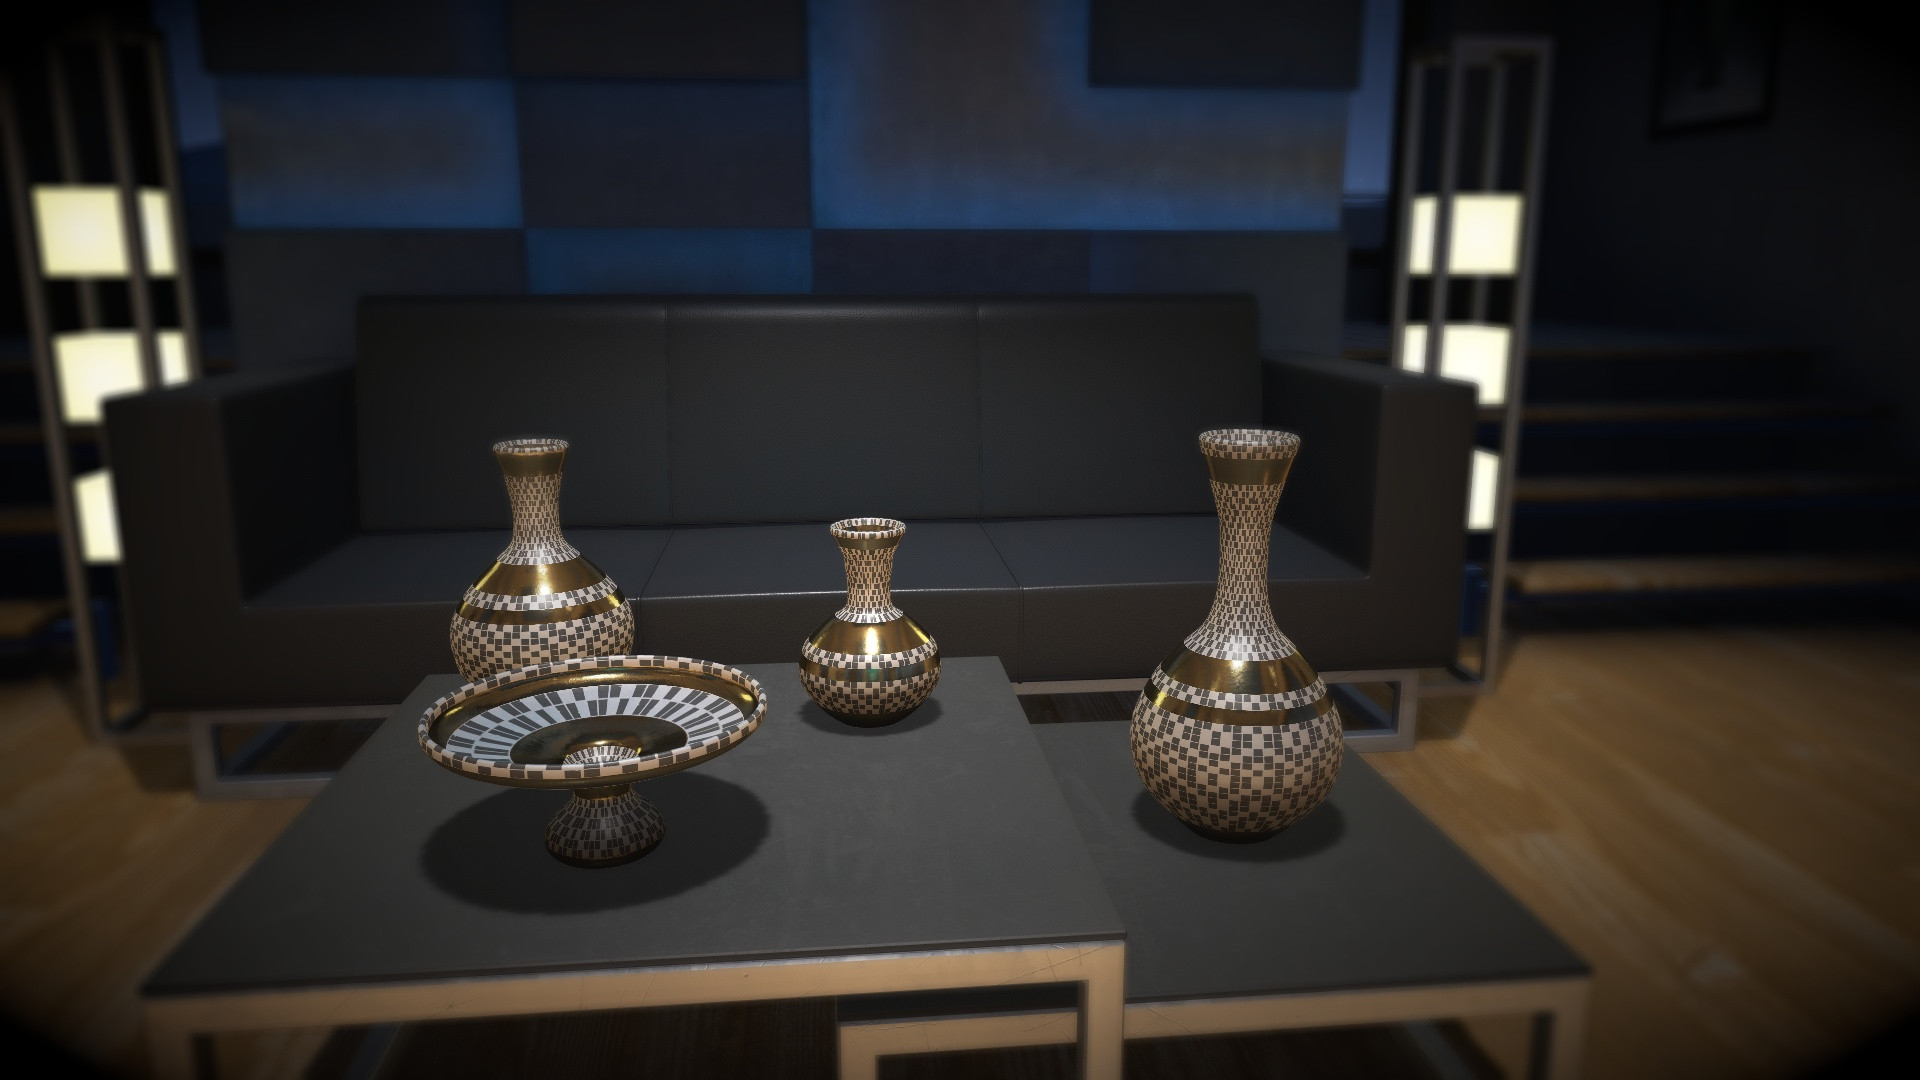 Let's Create! Pottery VR